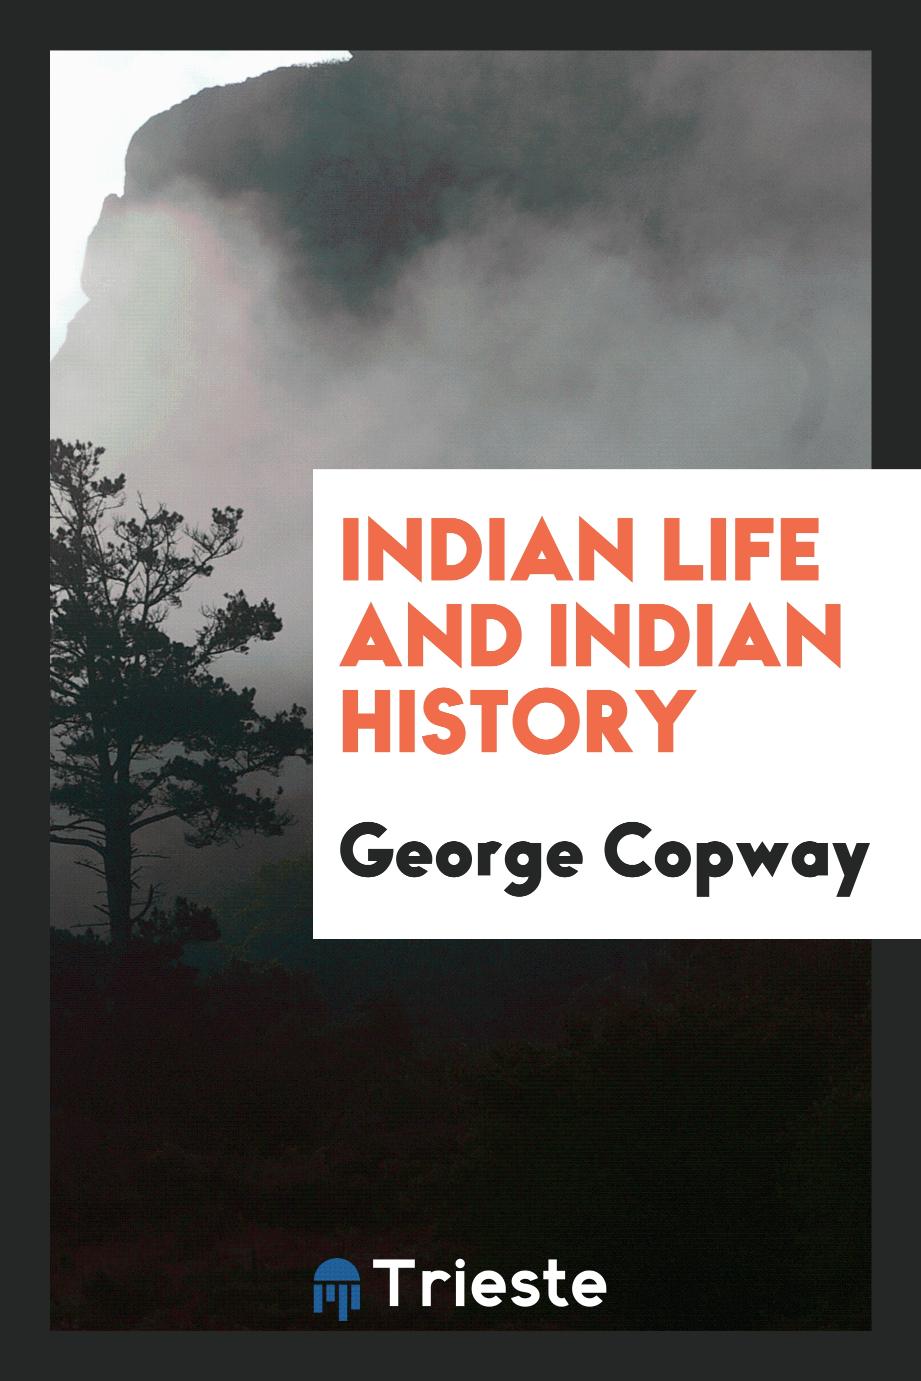 Indian life and Indian history